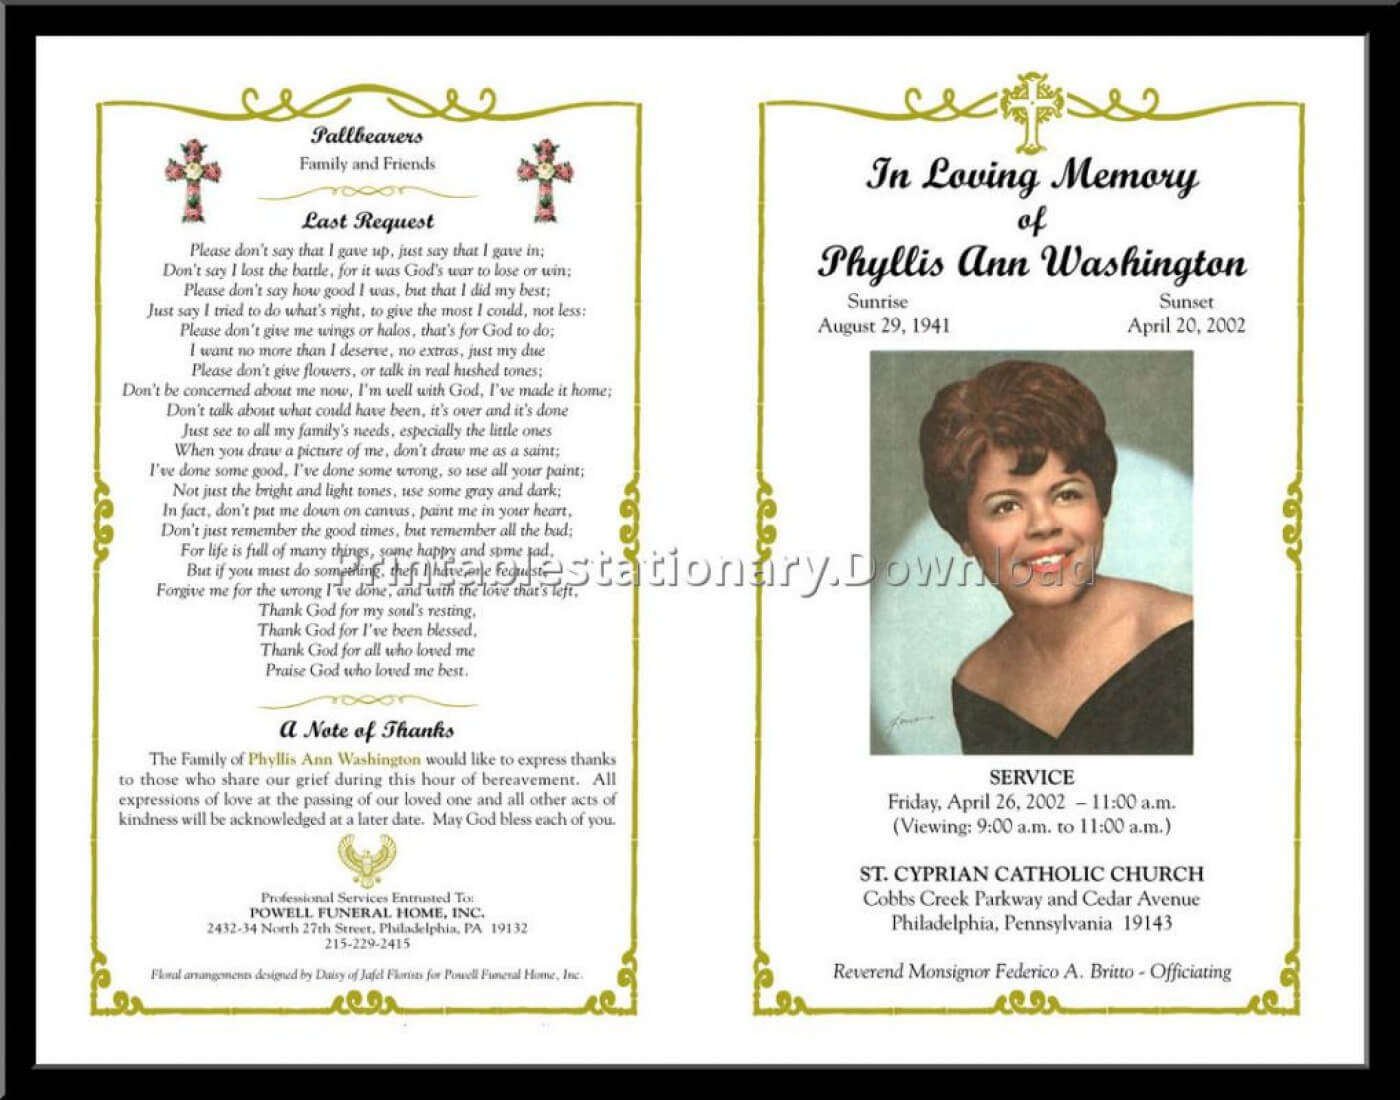 012 Free Obituary Template Download Ideas Incredible Funeral Throughout Free Obituary Template For Microsoft Word